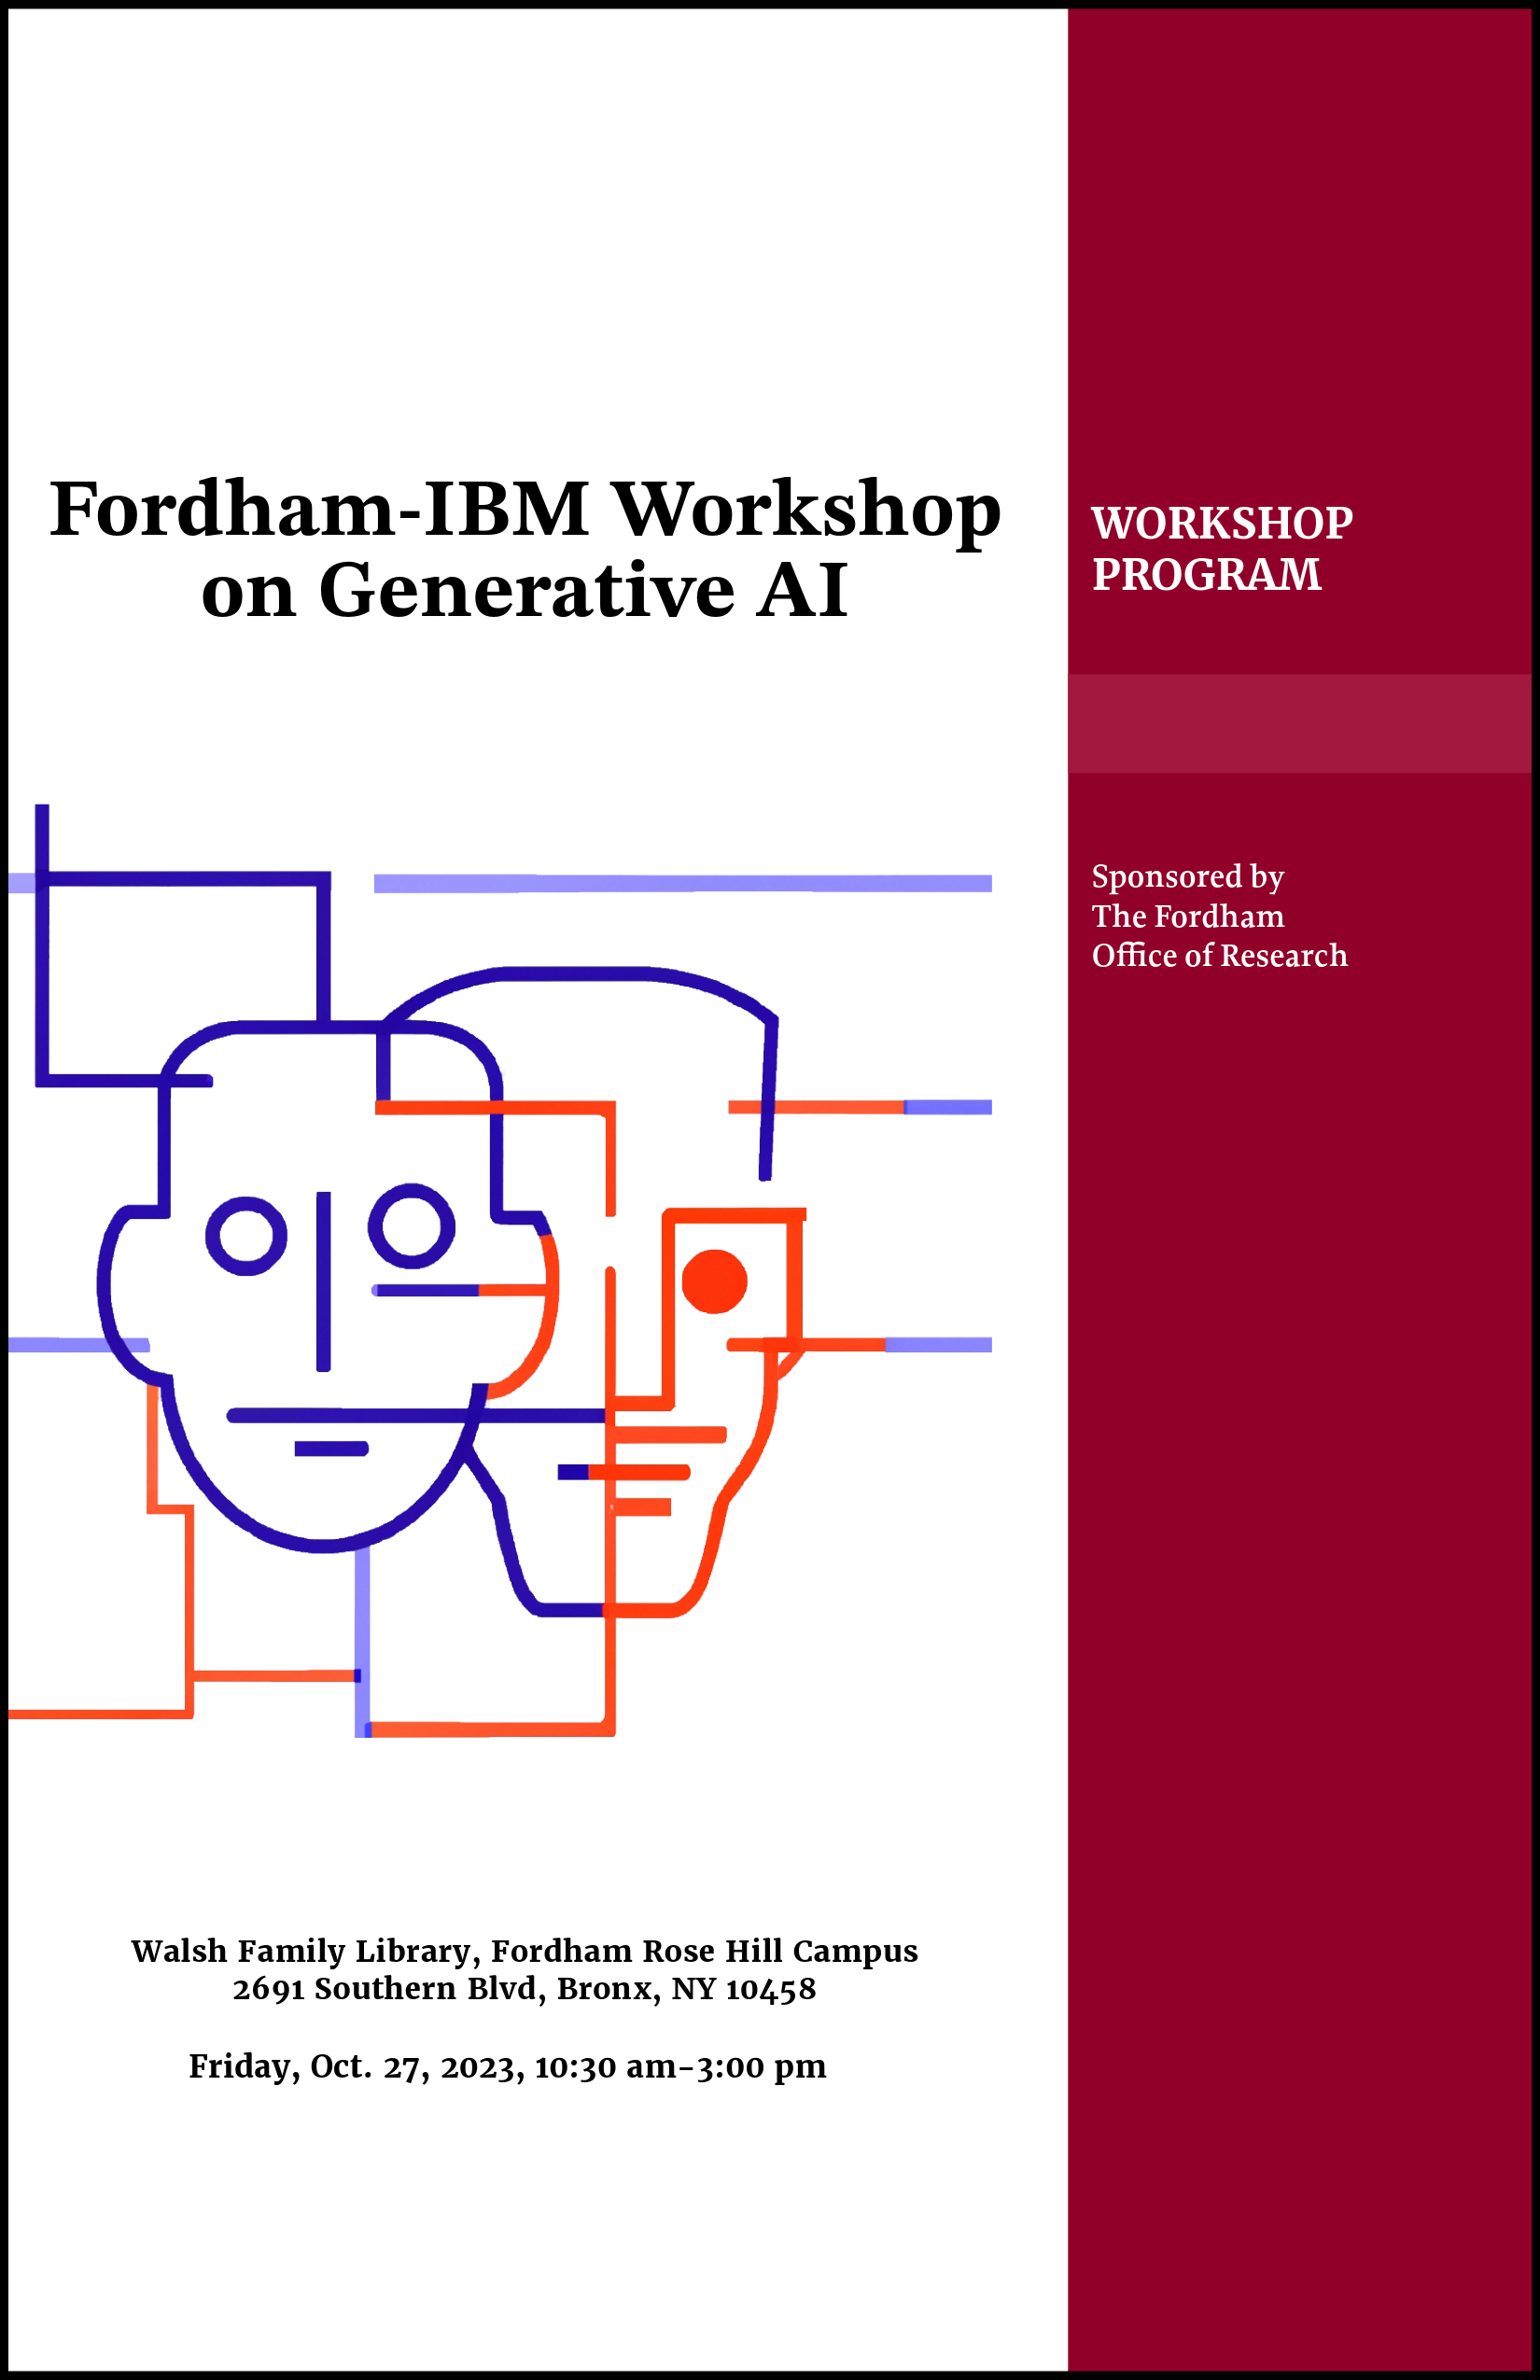 This program cover image was generated with assistance from DALL-E, an AI model developed by OpenAI, and customized by Nolan Zhang, Fordham Ph.D. candidate in GSS and Research Assistant to the Office of Research.